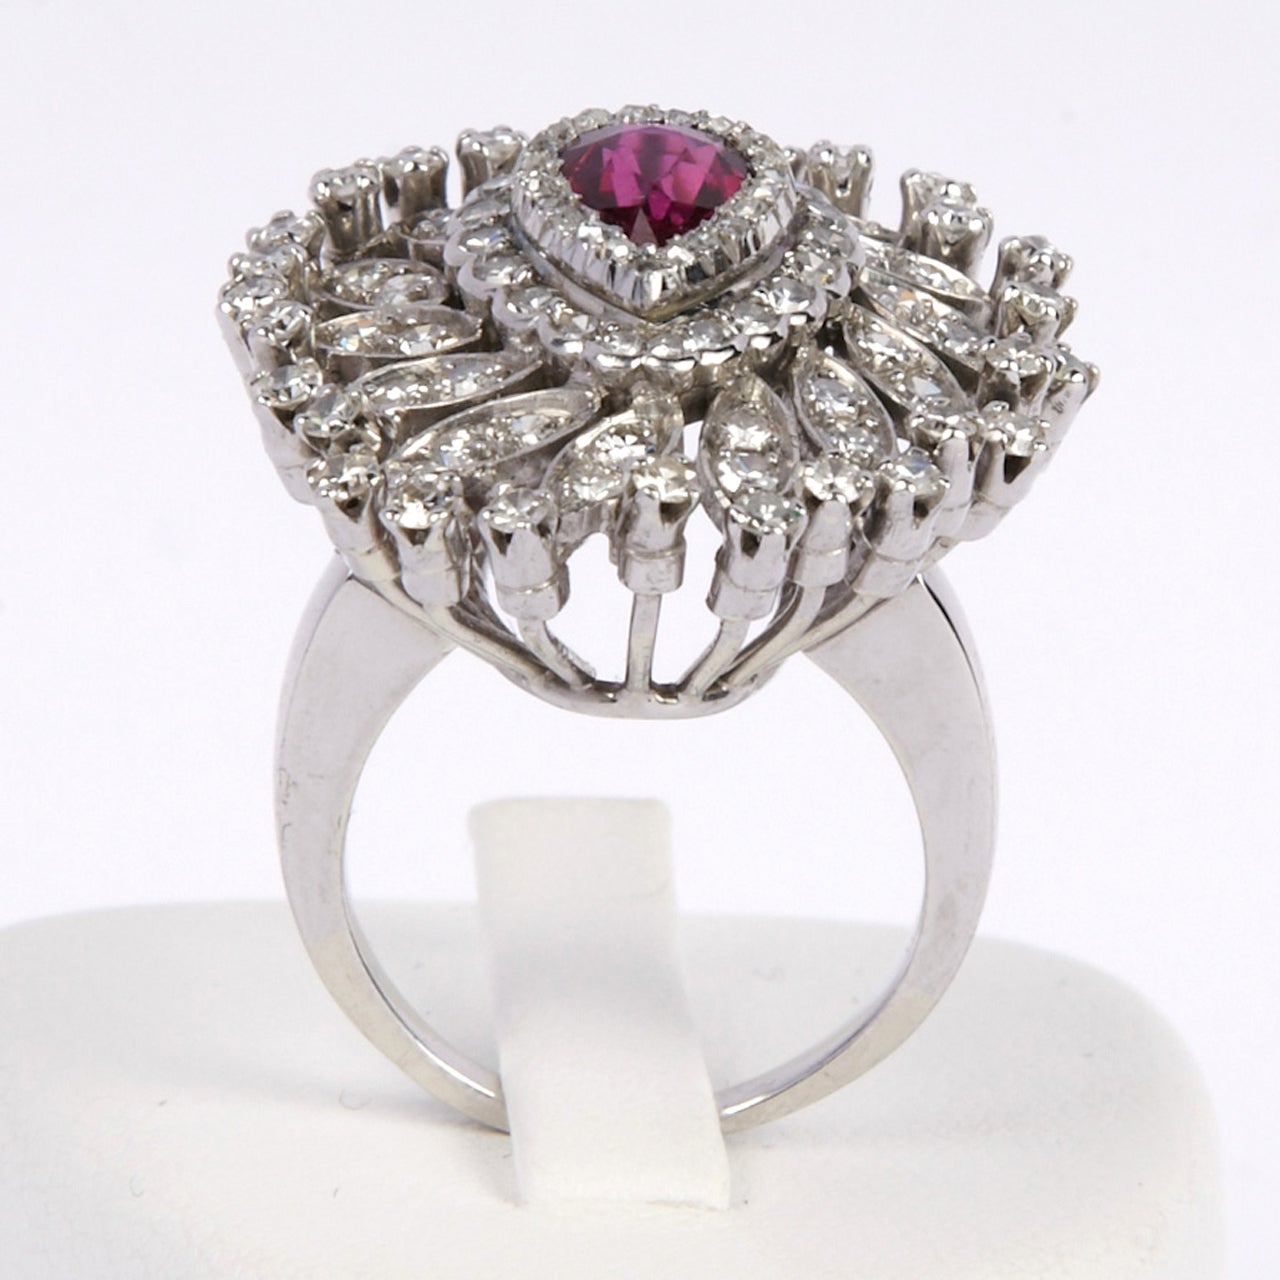 Ruby, diamonds, and white gold ring For Sale at 1stDibs